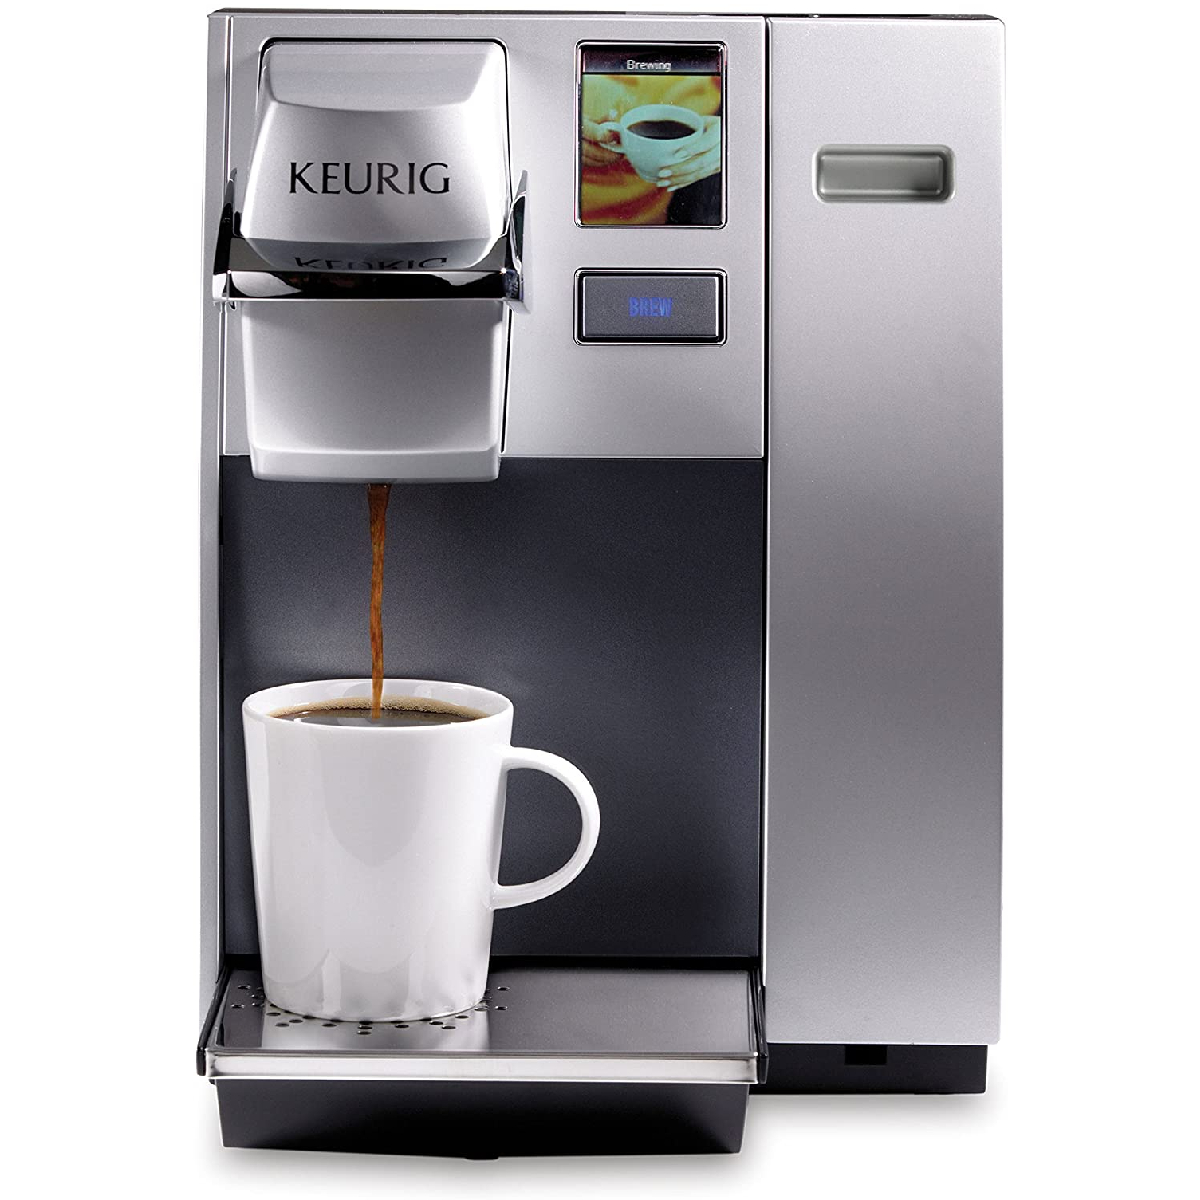 Keurig K155 Office Pro – For Small Offices